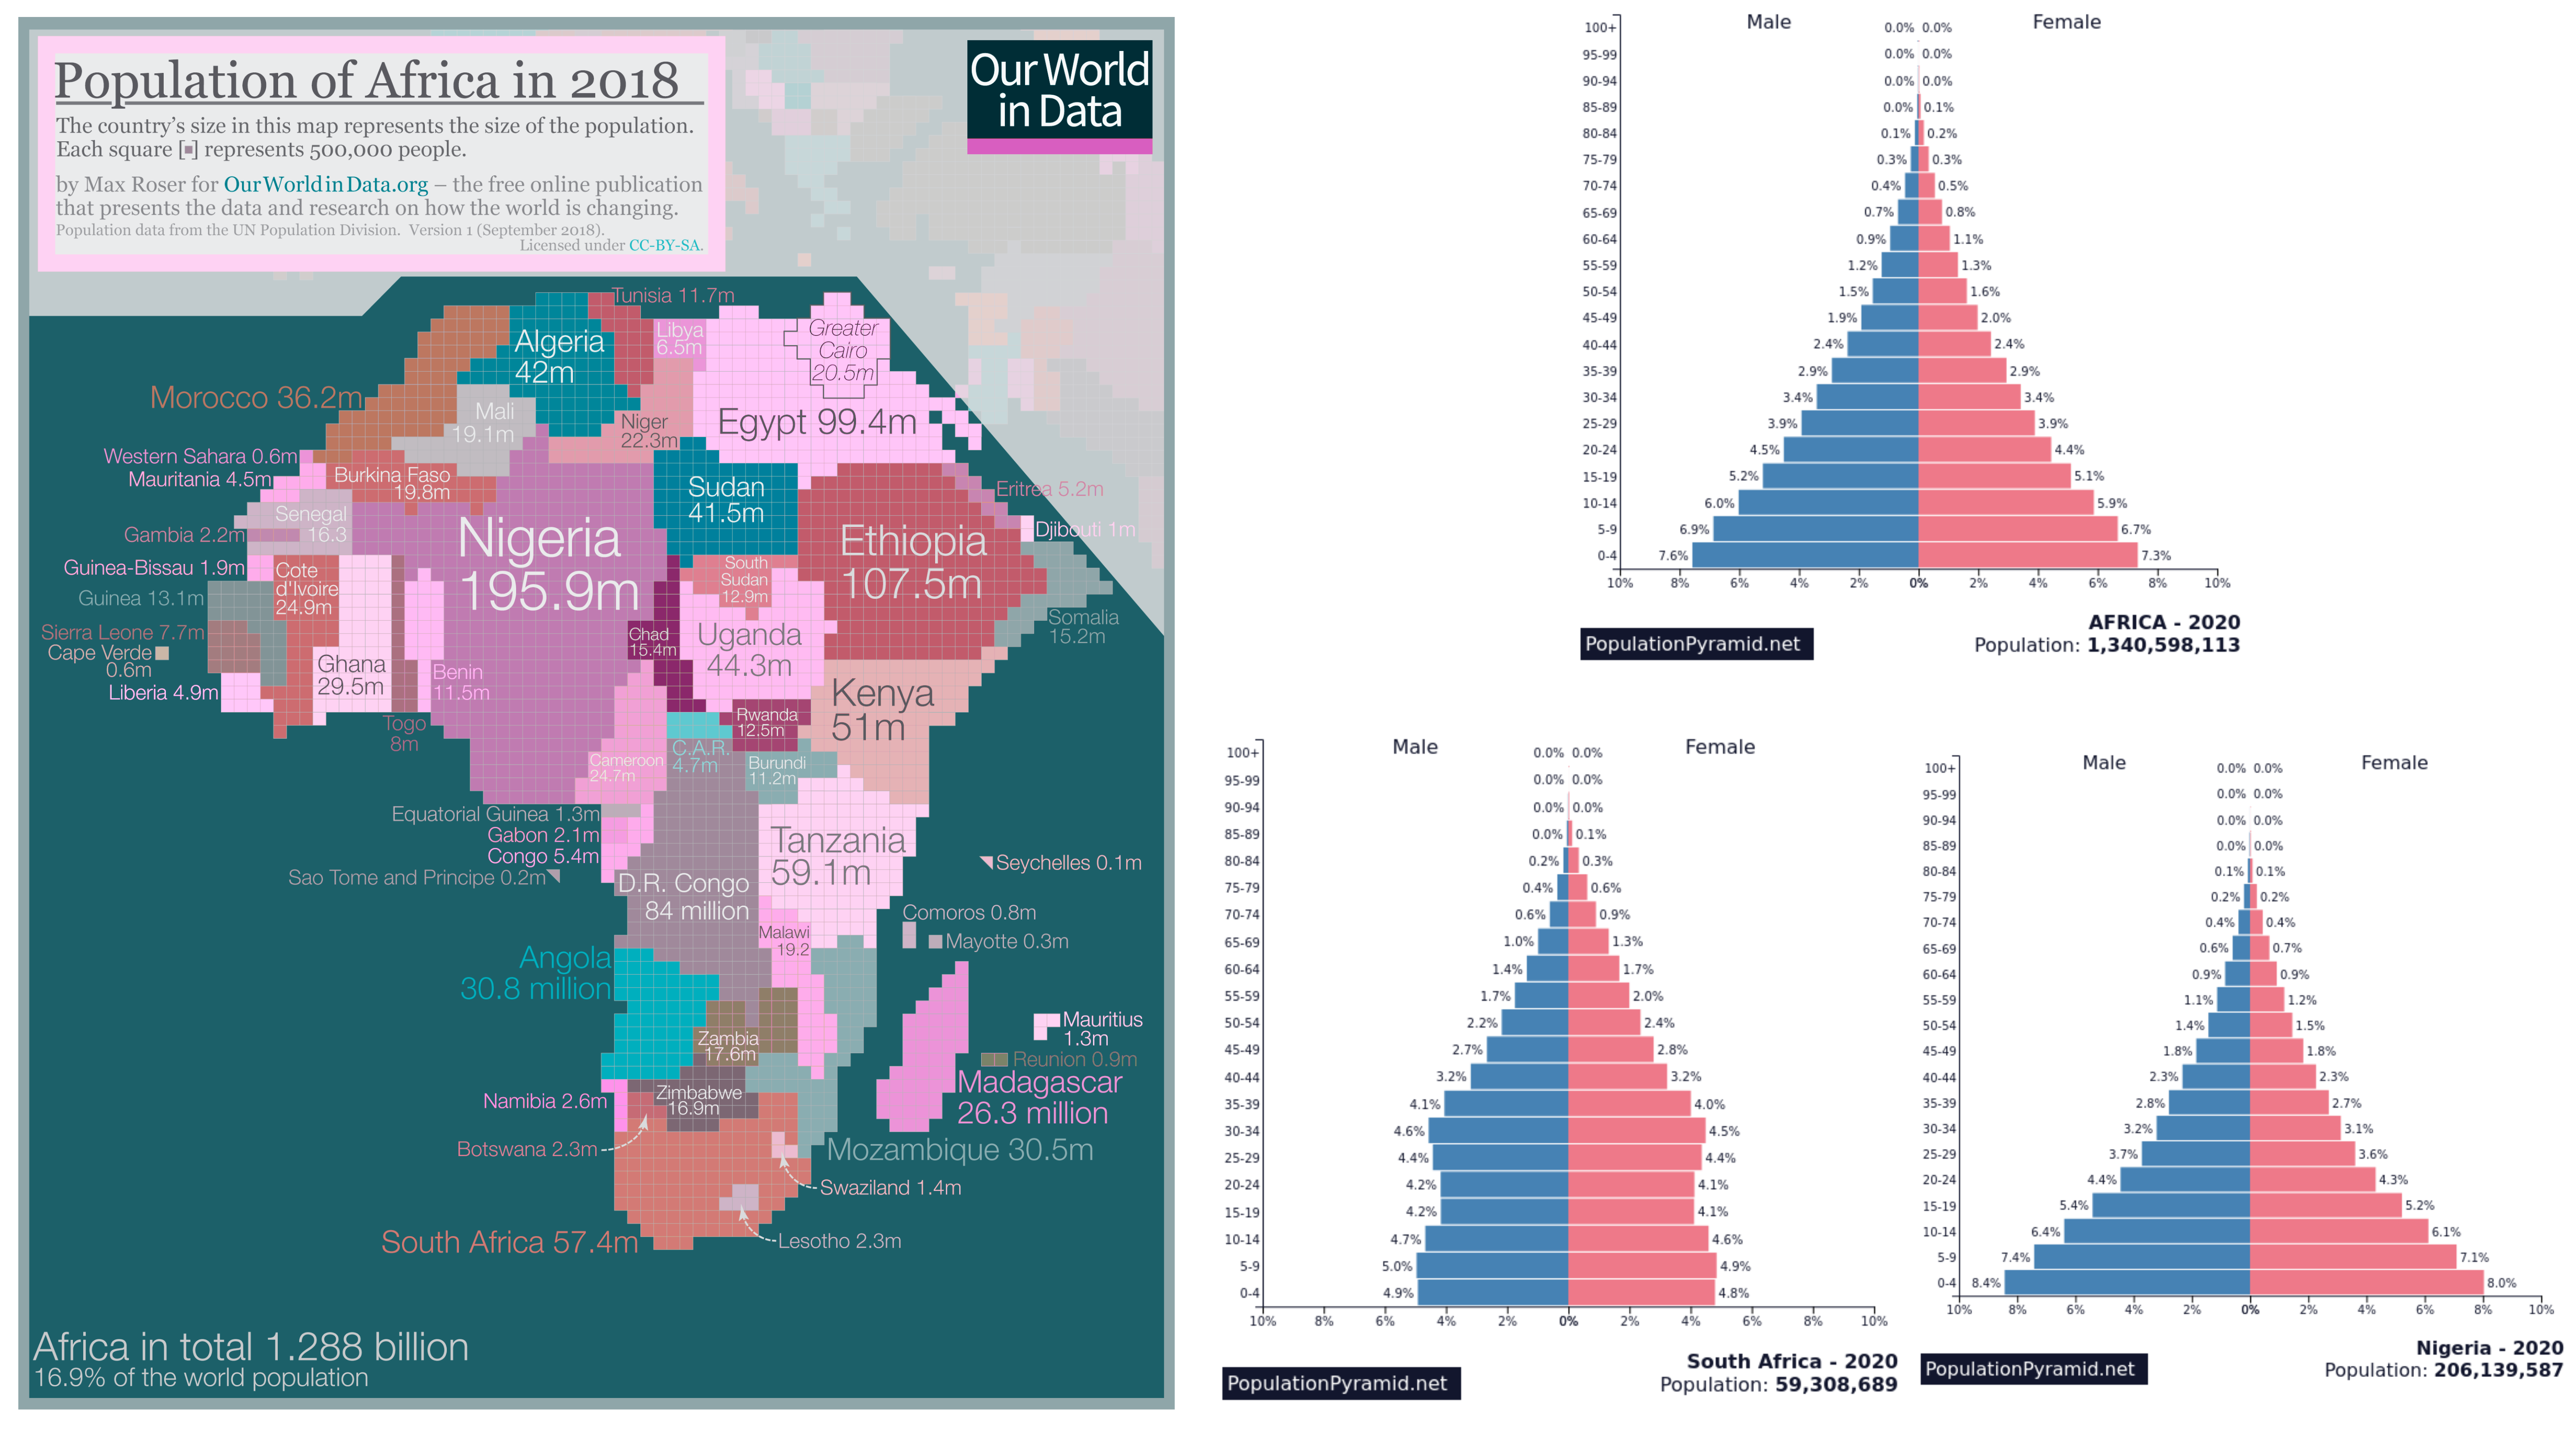 Nigeria, Ethiopia, and Egypt have highest populations; population pyramids of Africa and Nigeria are pyramid-shaped